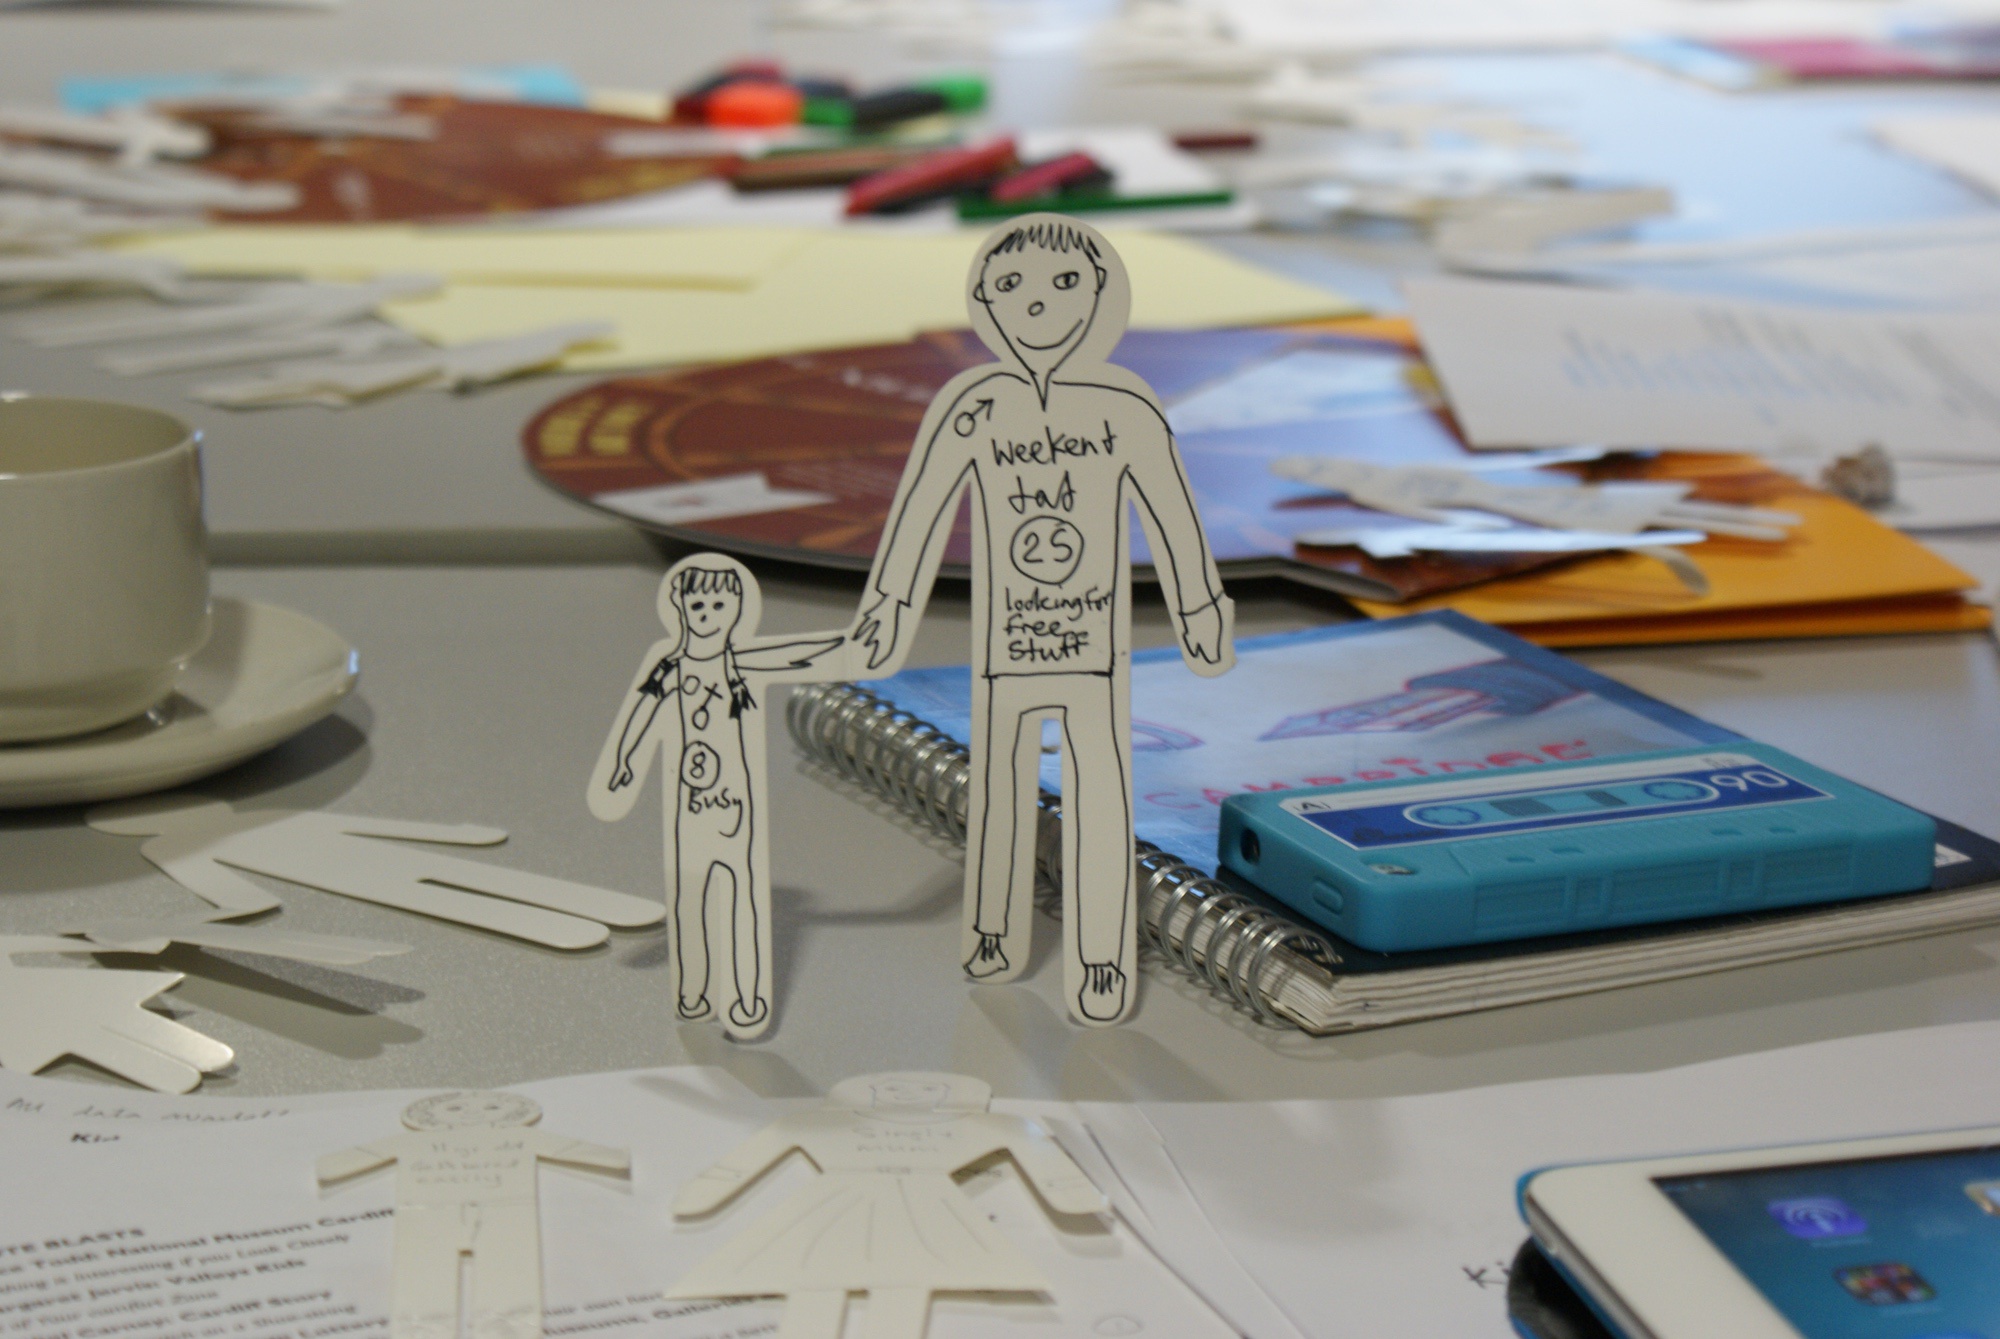 A cardboard cut out of a dad and a child stands on a desk, covered with other workshop materials.